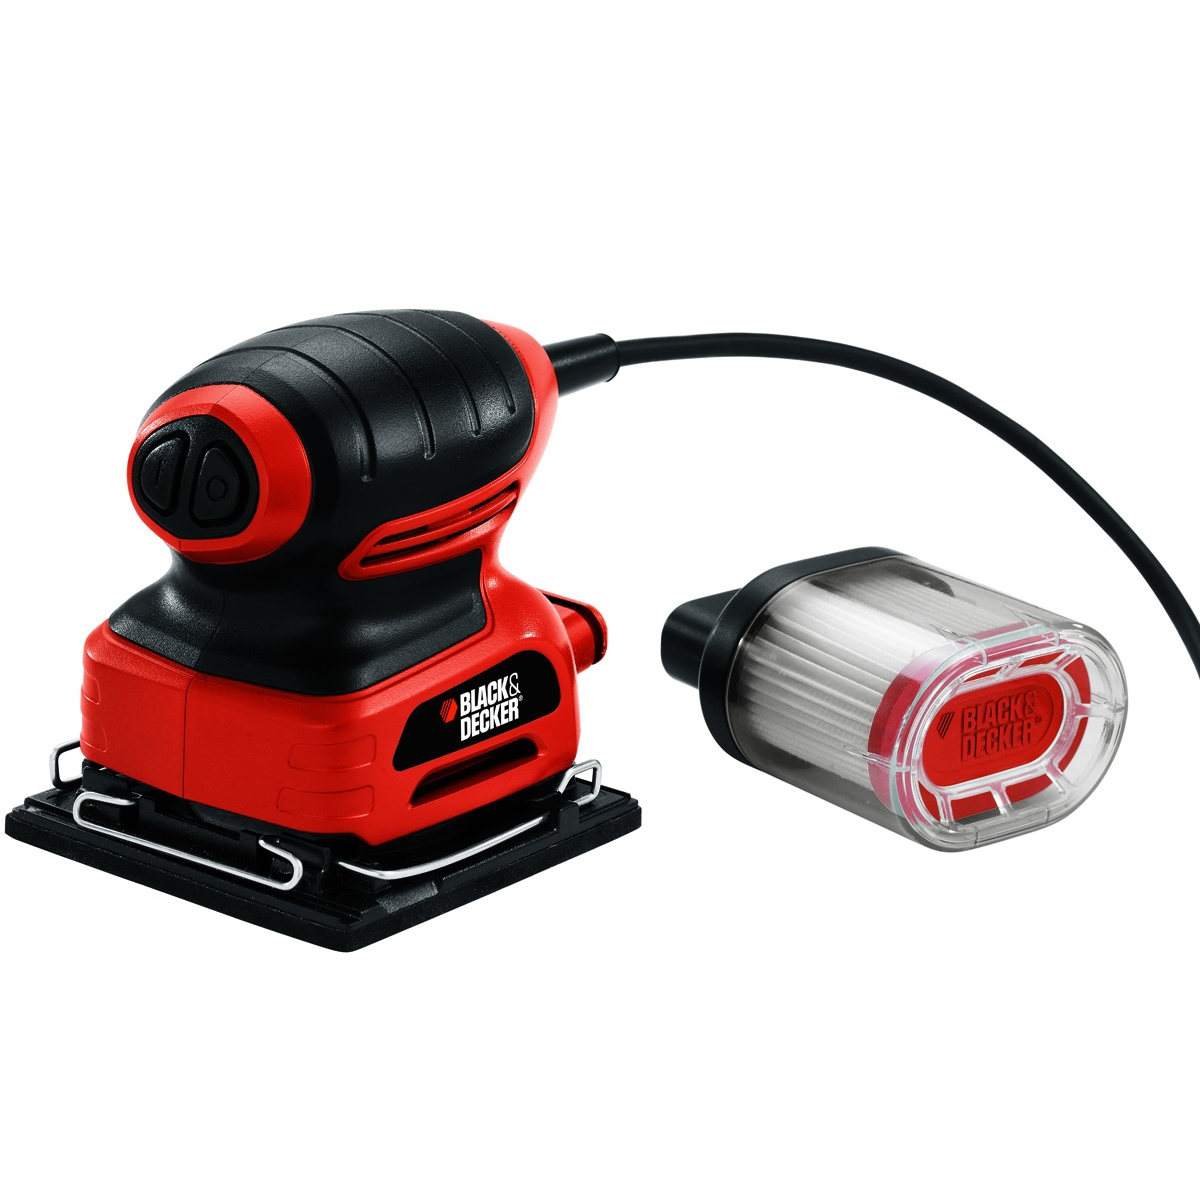 BDEQS300/QS900 Orbit Sander with Paddle Switch Actuation, 2 A